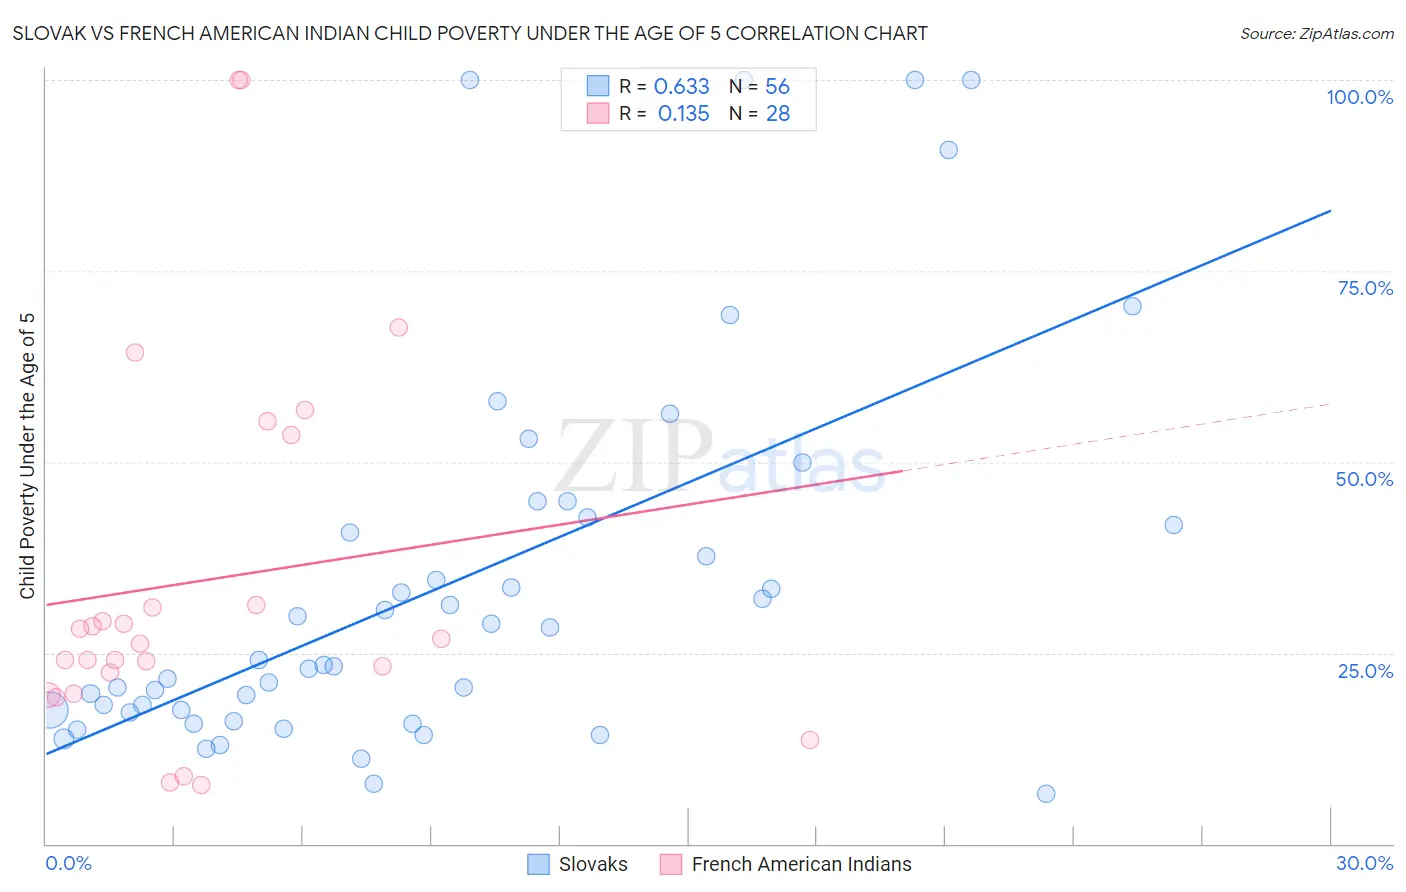 Slovak vs French American Indian Child Poverty Under the Age of 5